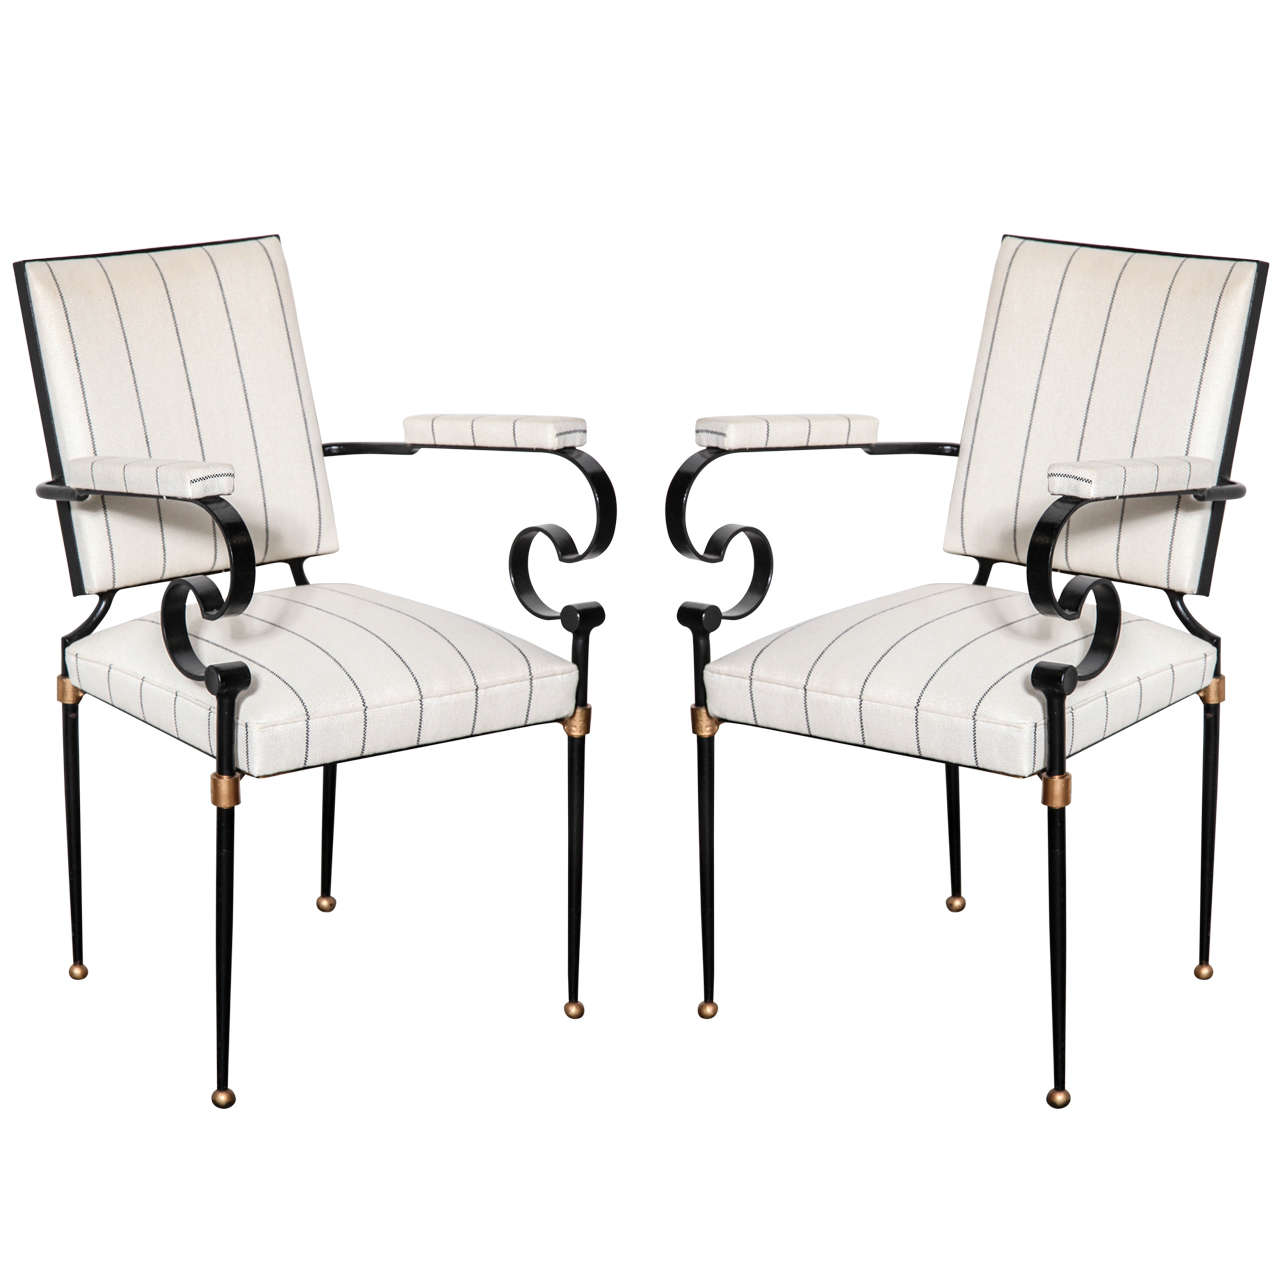 Pair of 20th c. French Iron and Gilt Armchairs in the Manner of G. Poillerat